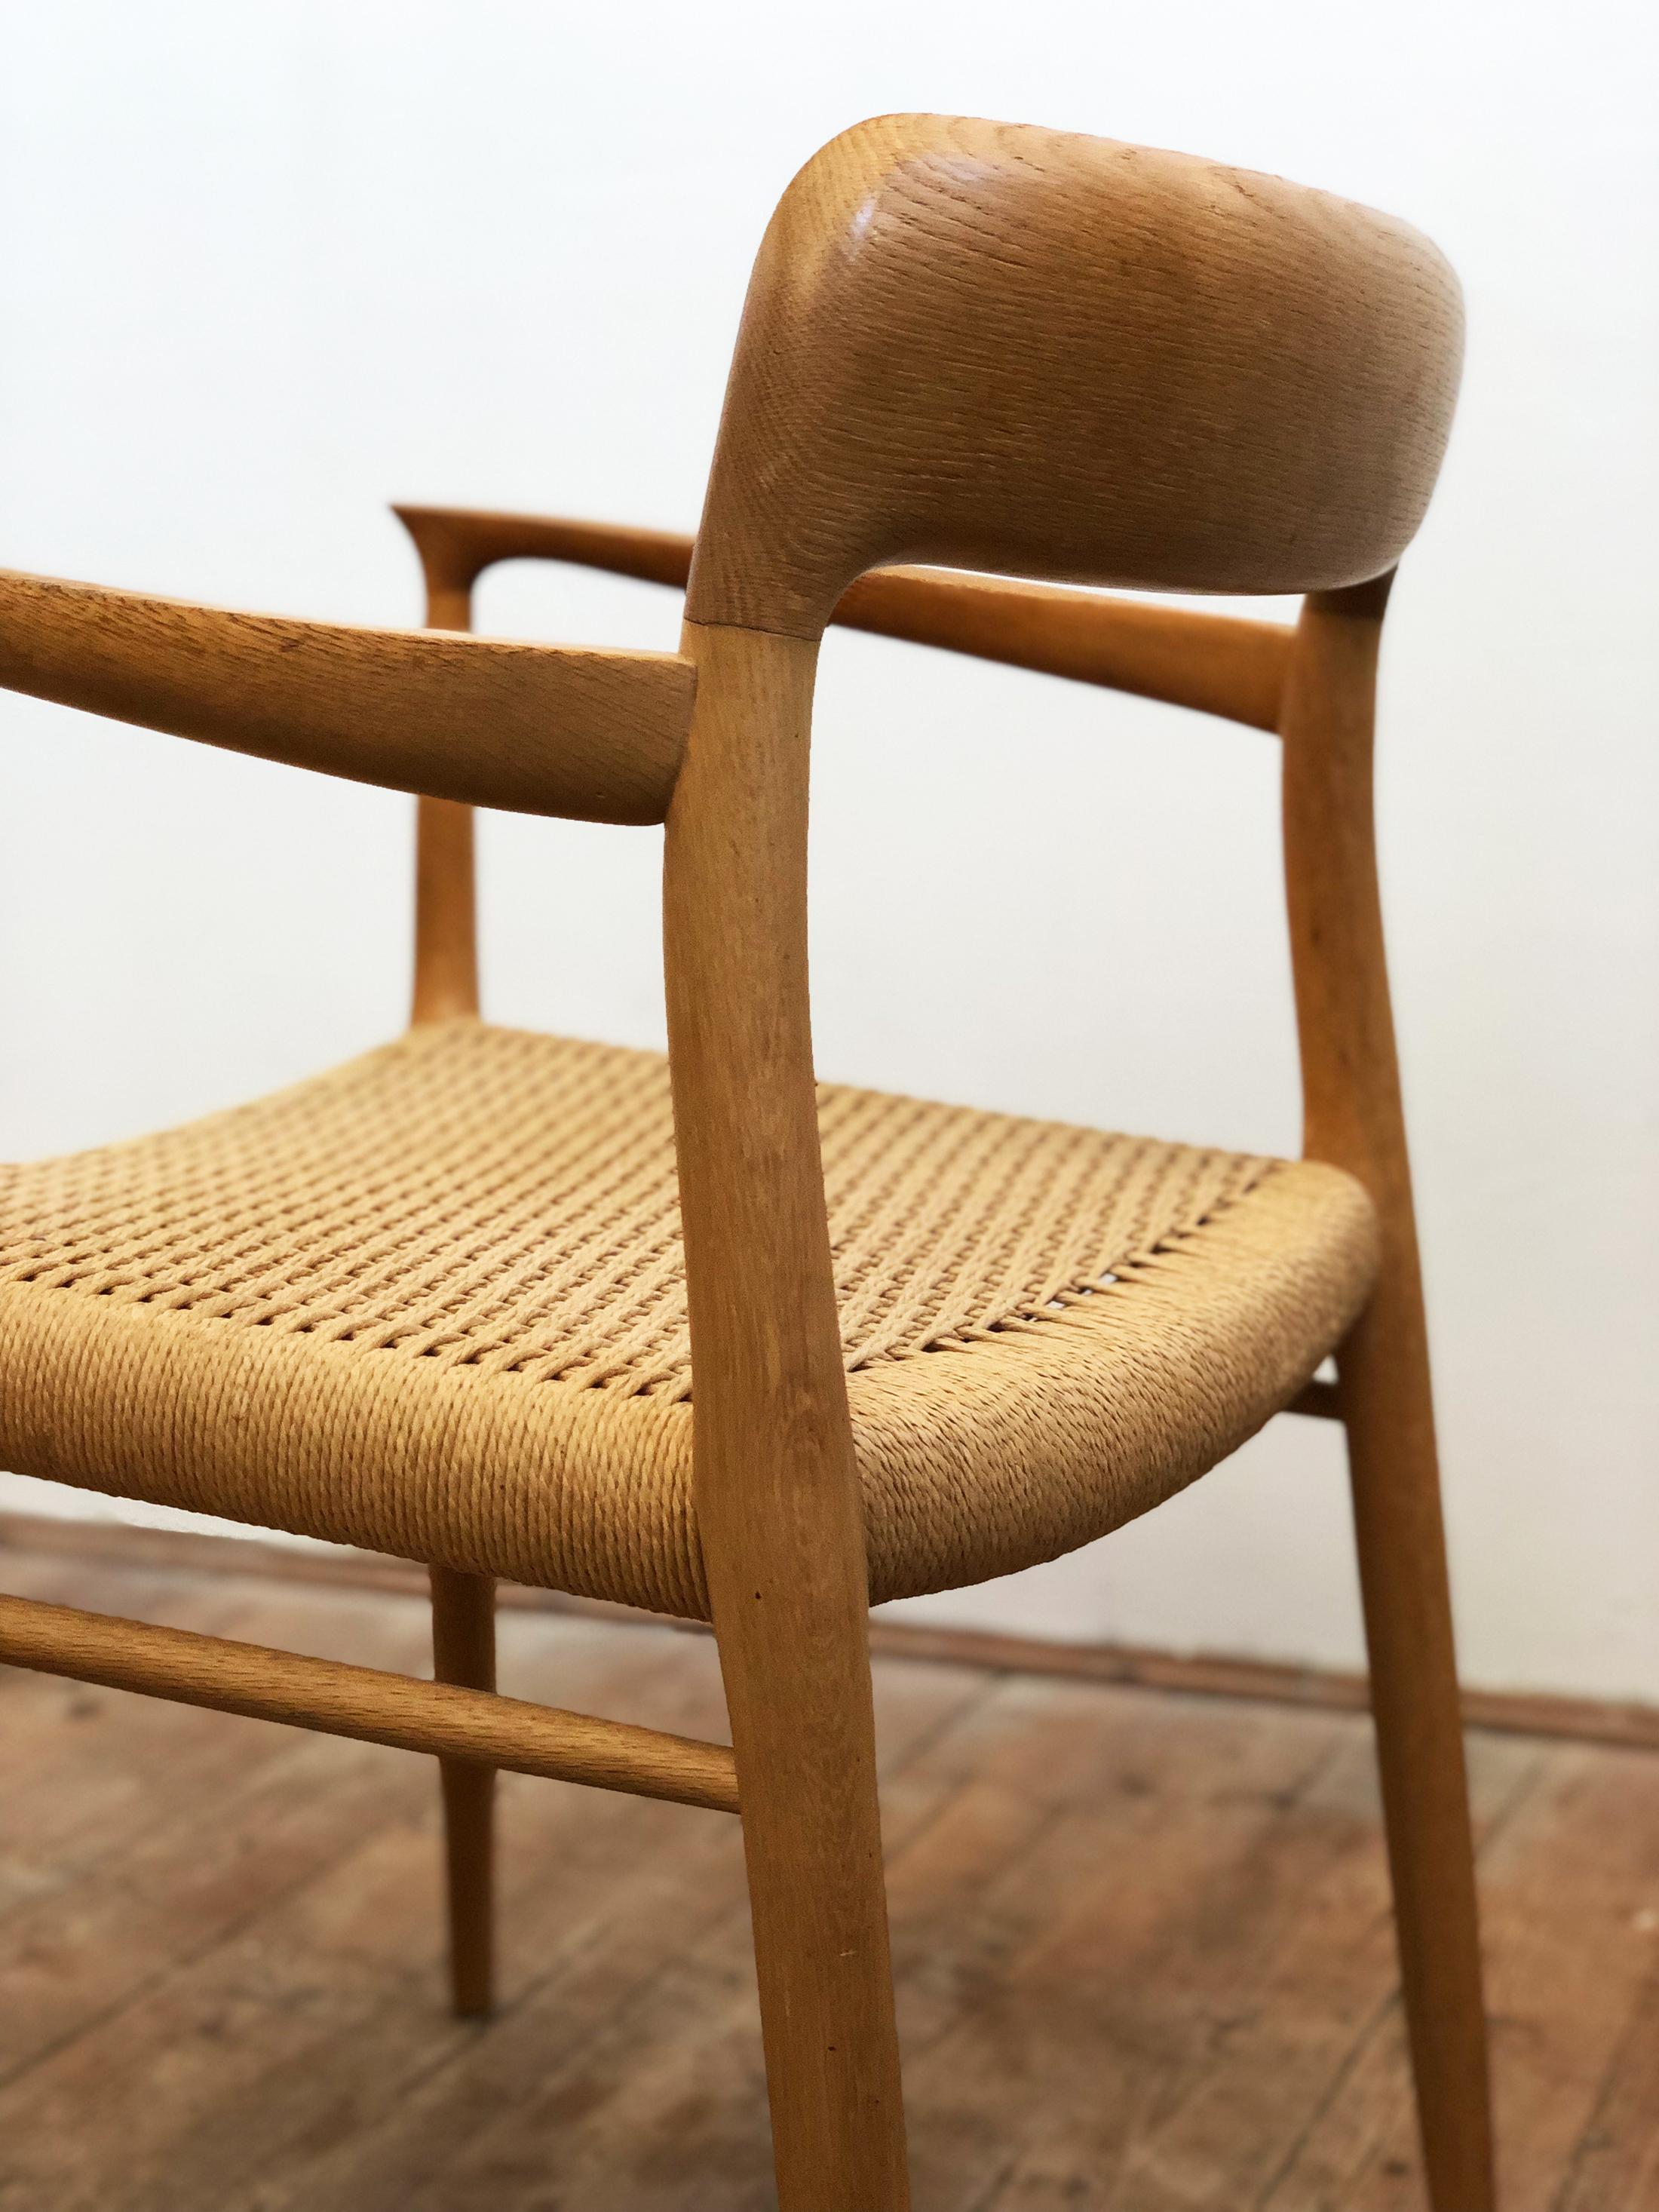 Papercord Midcentury Oak Dining Chairs, Model 56 by Niels O. Møller with Paper Cord Seats